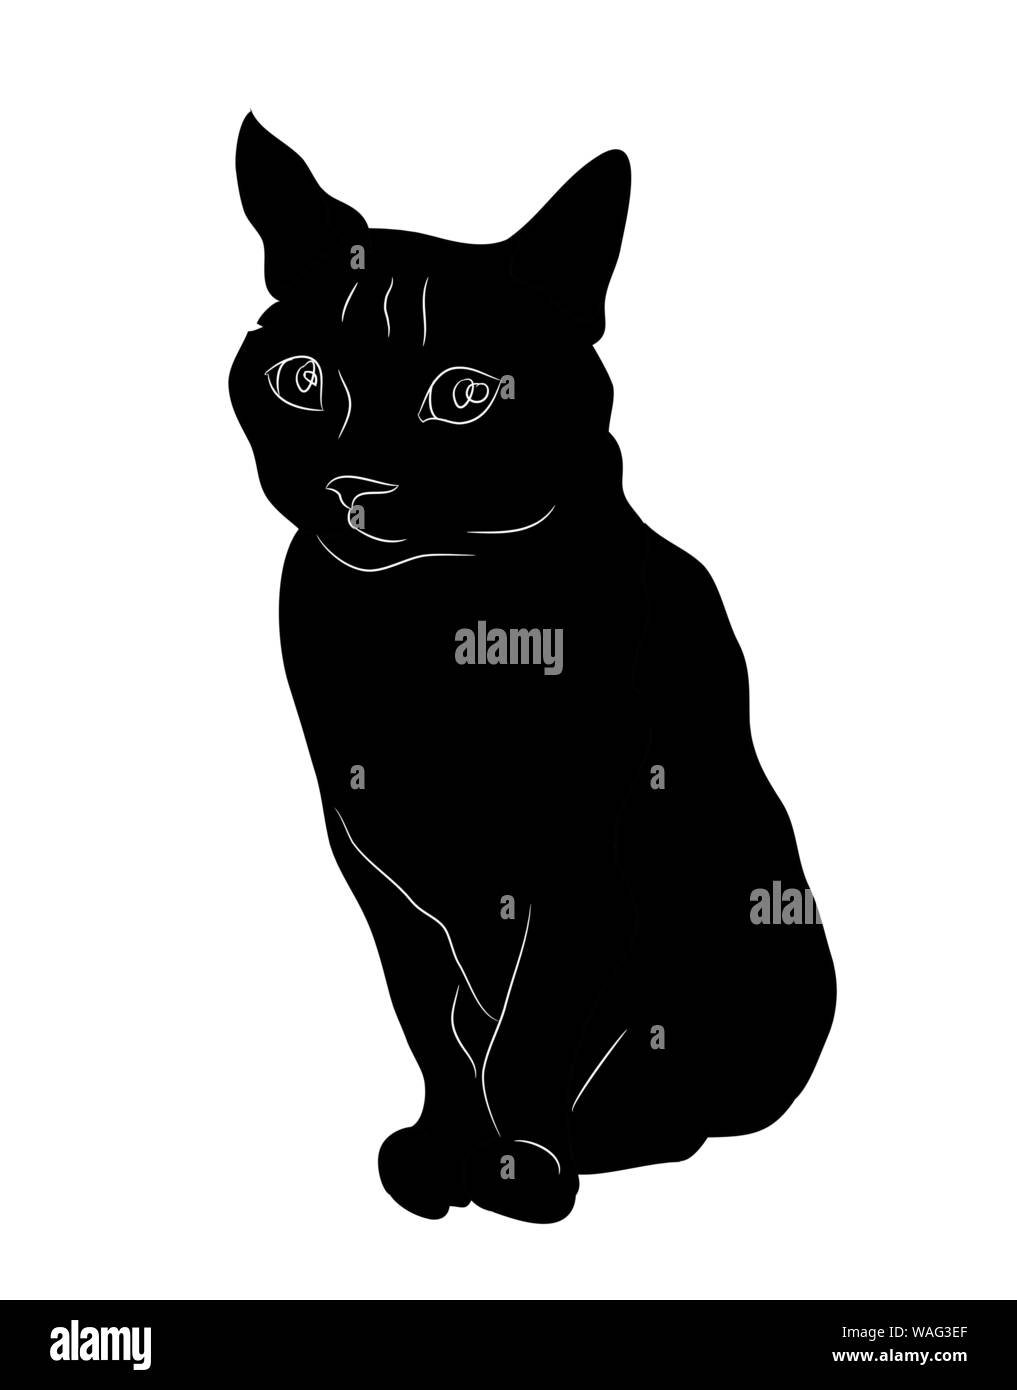 how to draw cat sitting side view